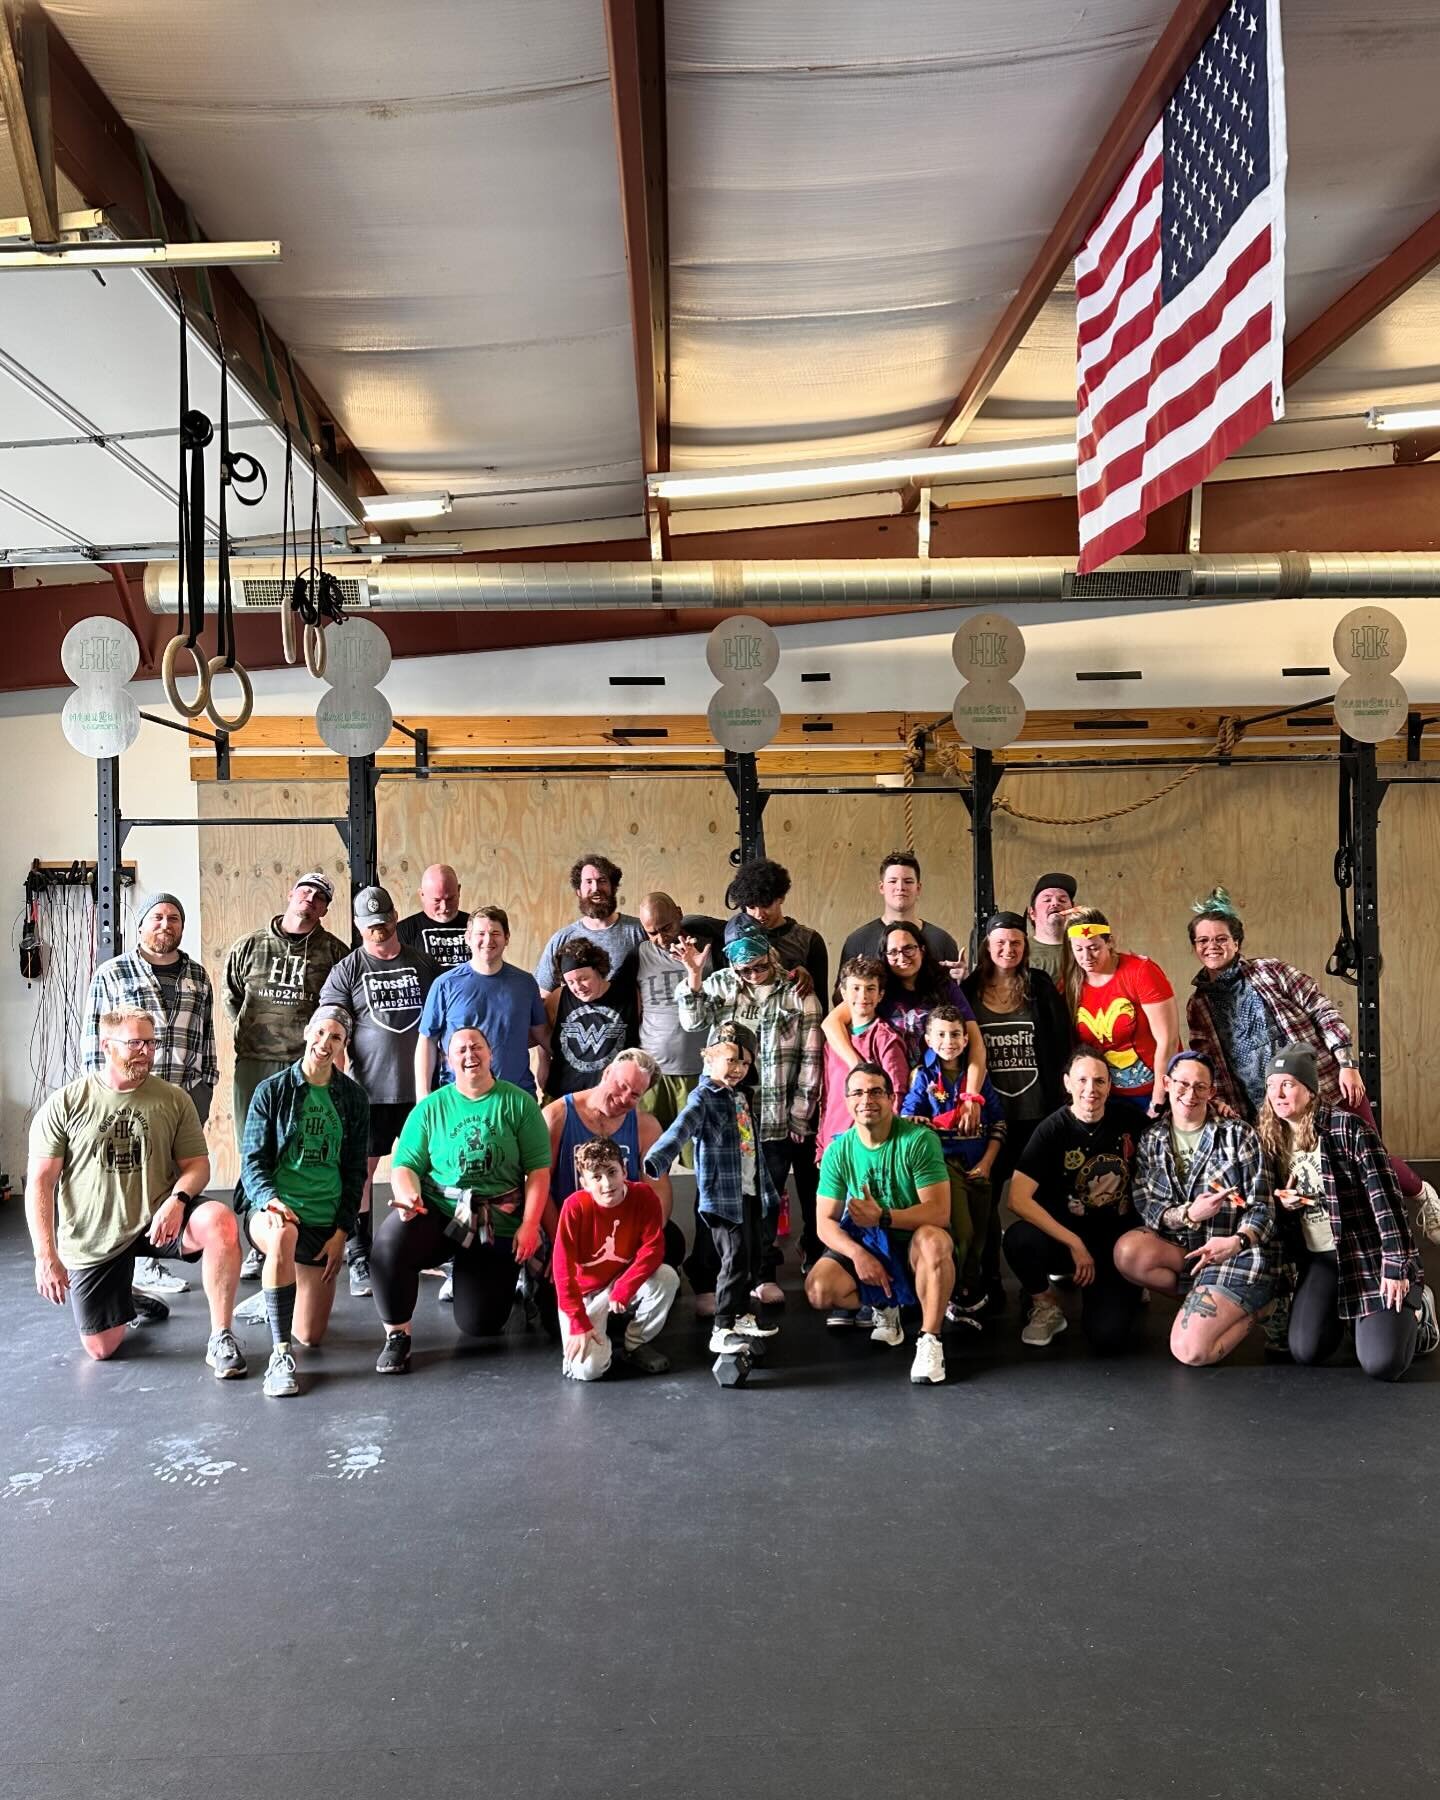 24.1 is in the books! Now bring on 24.2!

#crossfit 
#crossfitcompetition 
#crossfitathlete
#hard2killcrossfit 
#behard2killcrossfit 
#everydayisagreatdaytobehard2kill
#ashevillenc 
#hendersonvillenc 
#asheville
#fitness 
#828isgreat